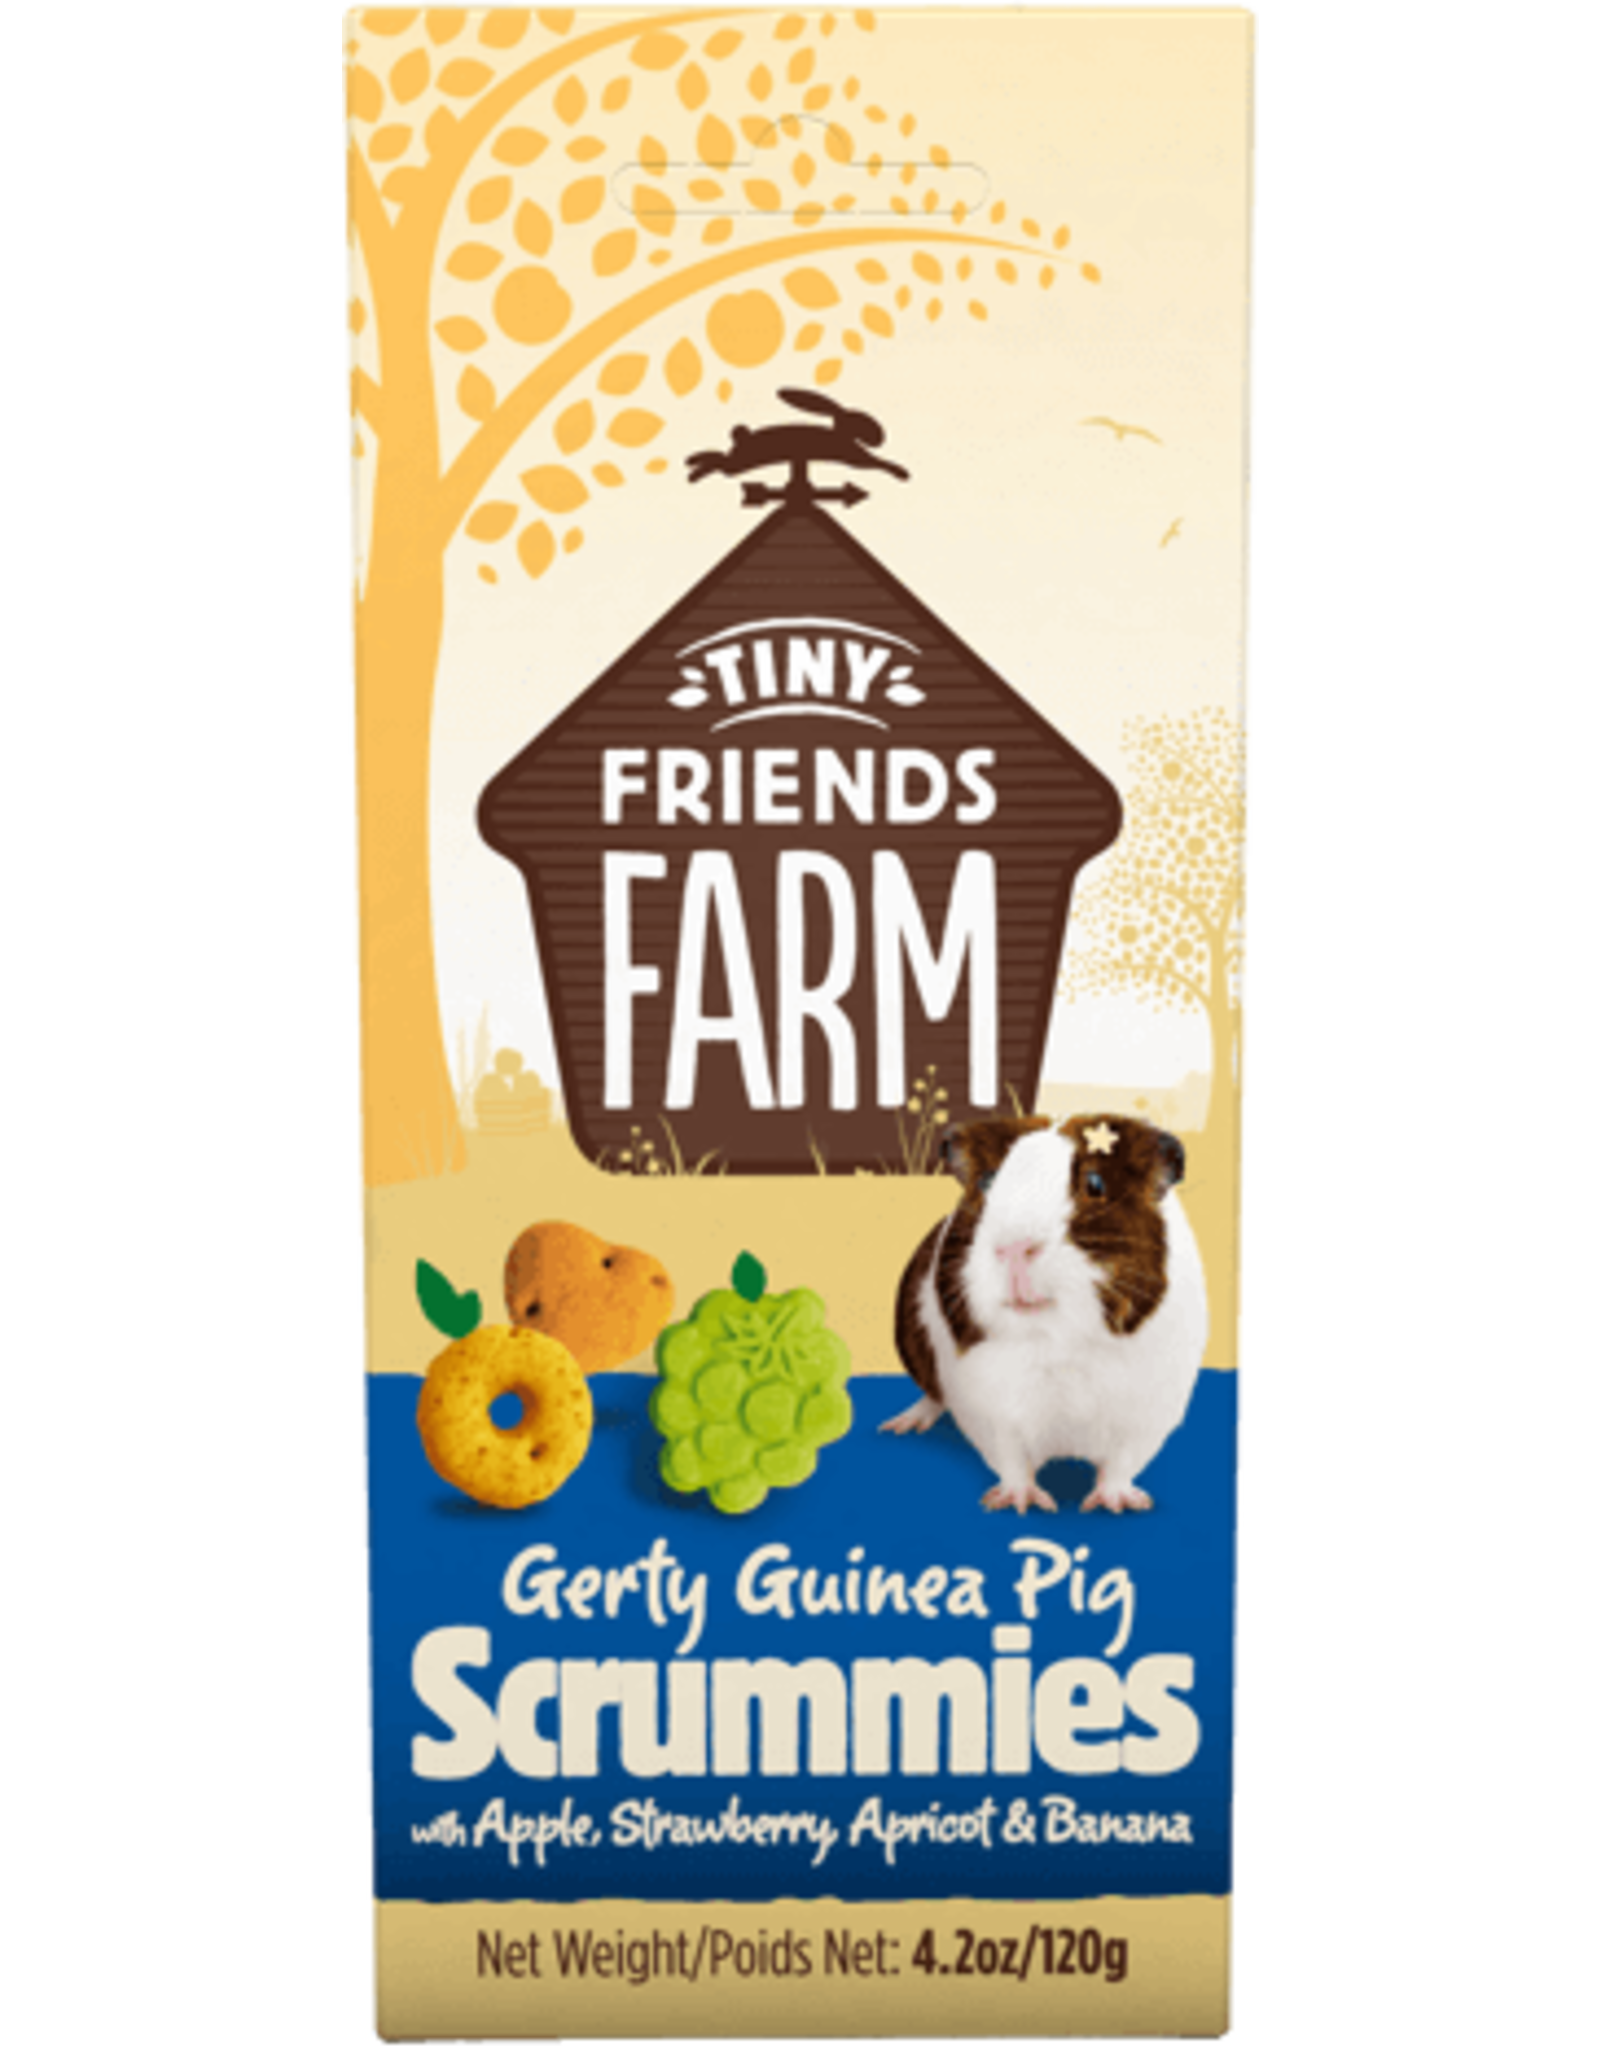 Supreme Pet Foods TINY FRIENDS FARM Gerty Guinea Pig Scrummies with Apple, Strawberry, Banana, Apricot